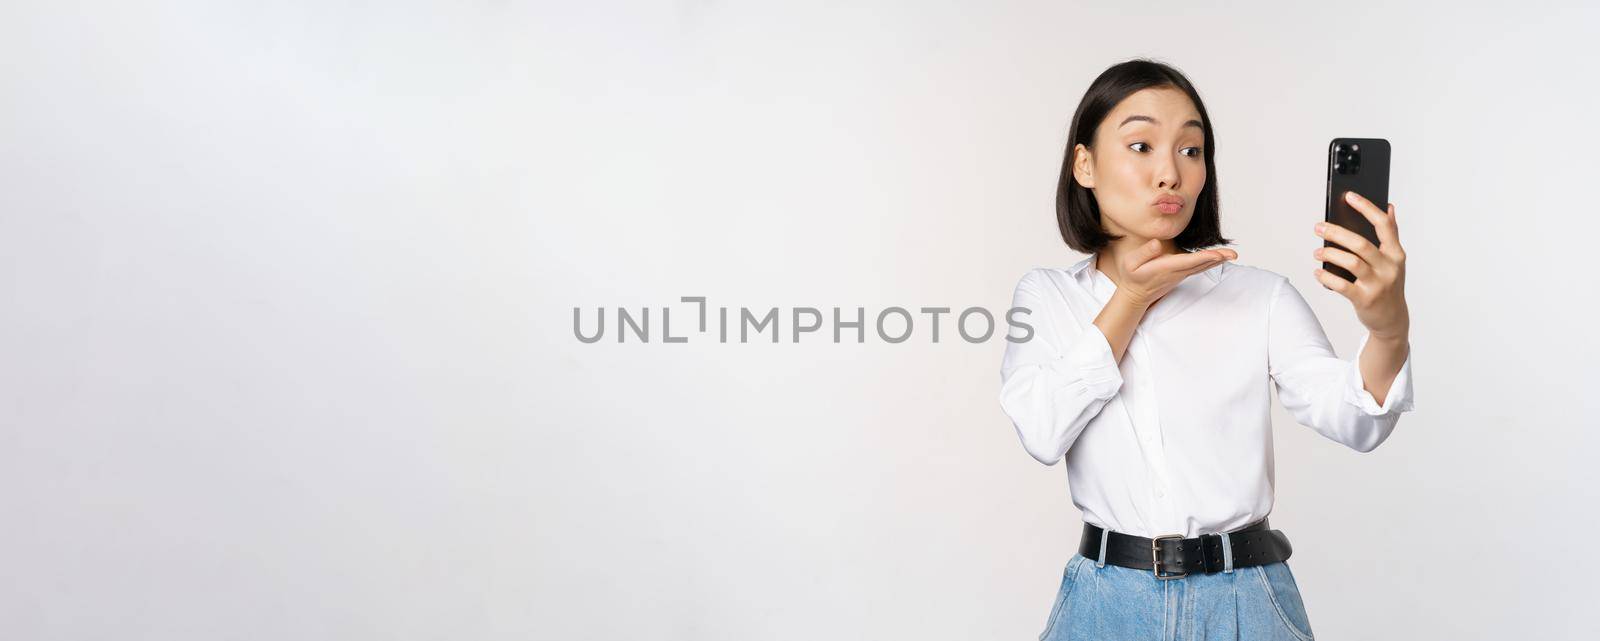 Image of asian cute girl video chat, sending air kiss at camera, taking selfie with app filters on smartphone, standing over white background.